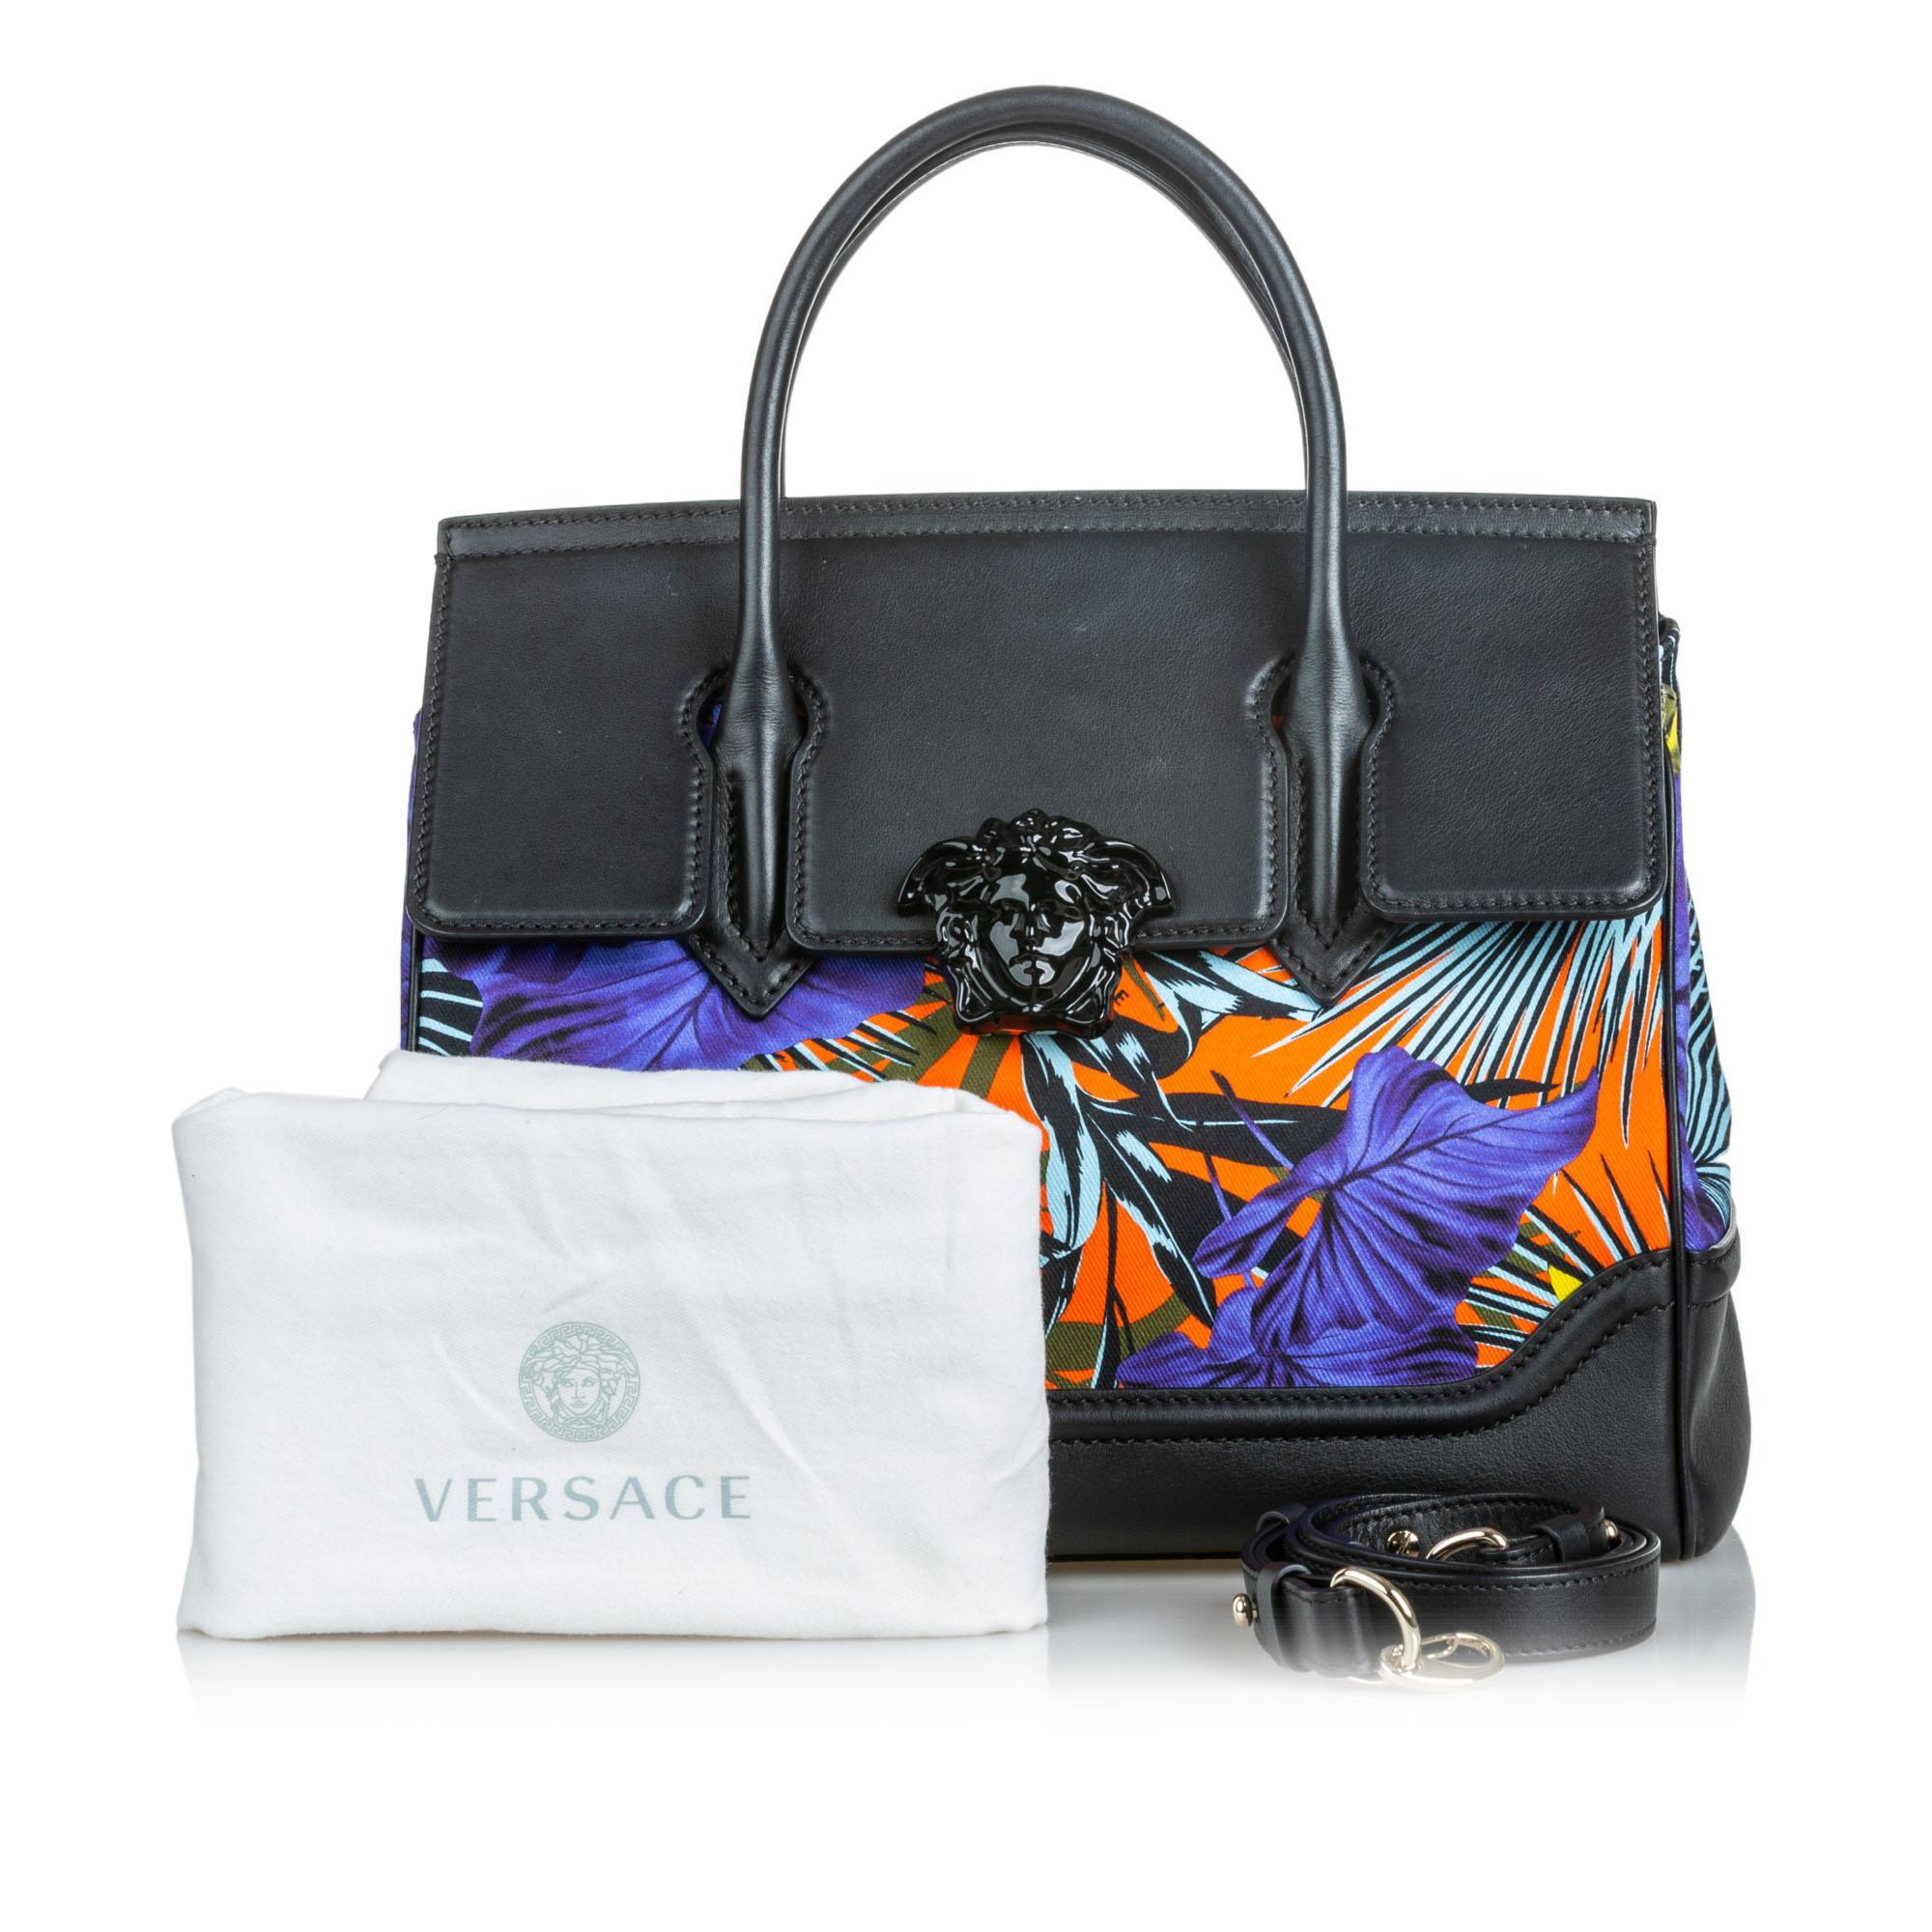 Versace Printed Canvas Palazzo Empire Satchel For Sale 11